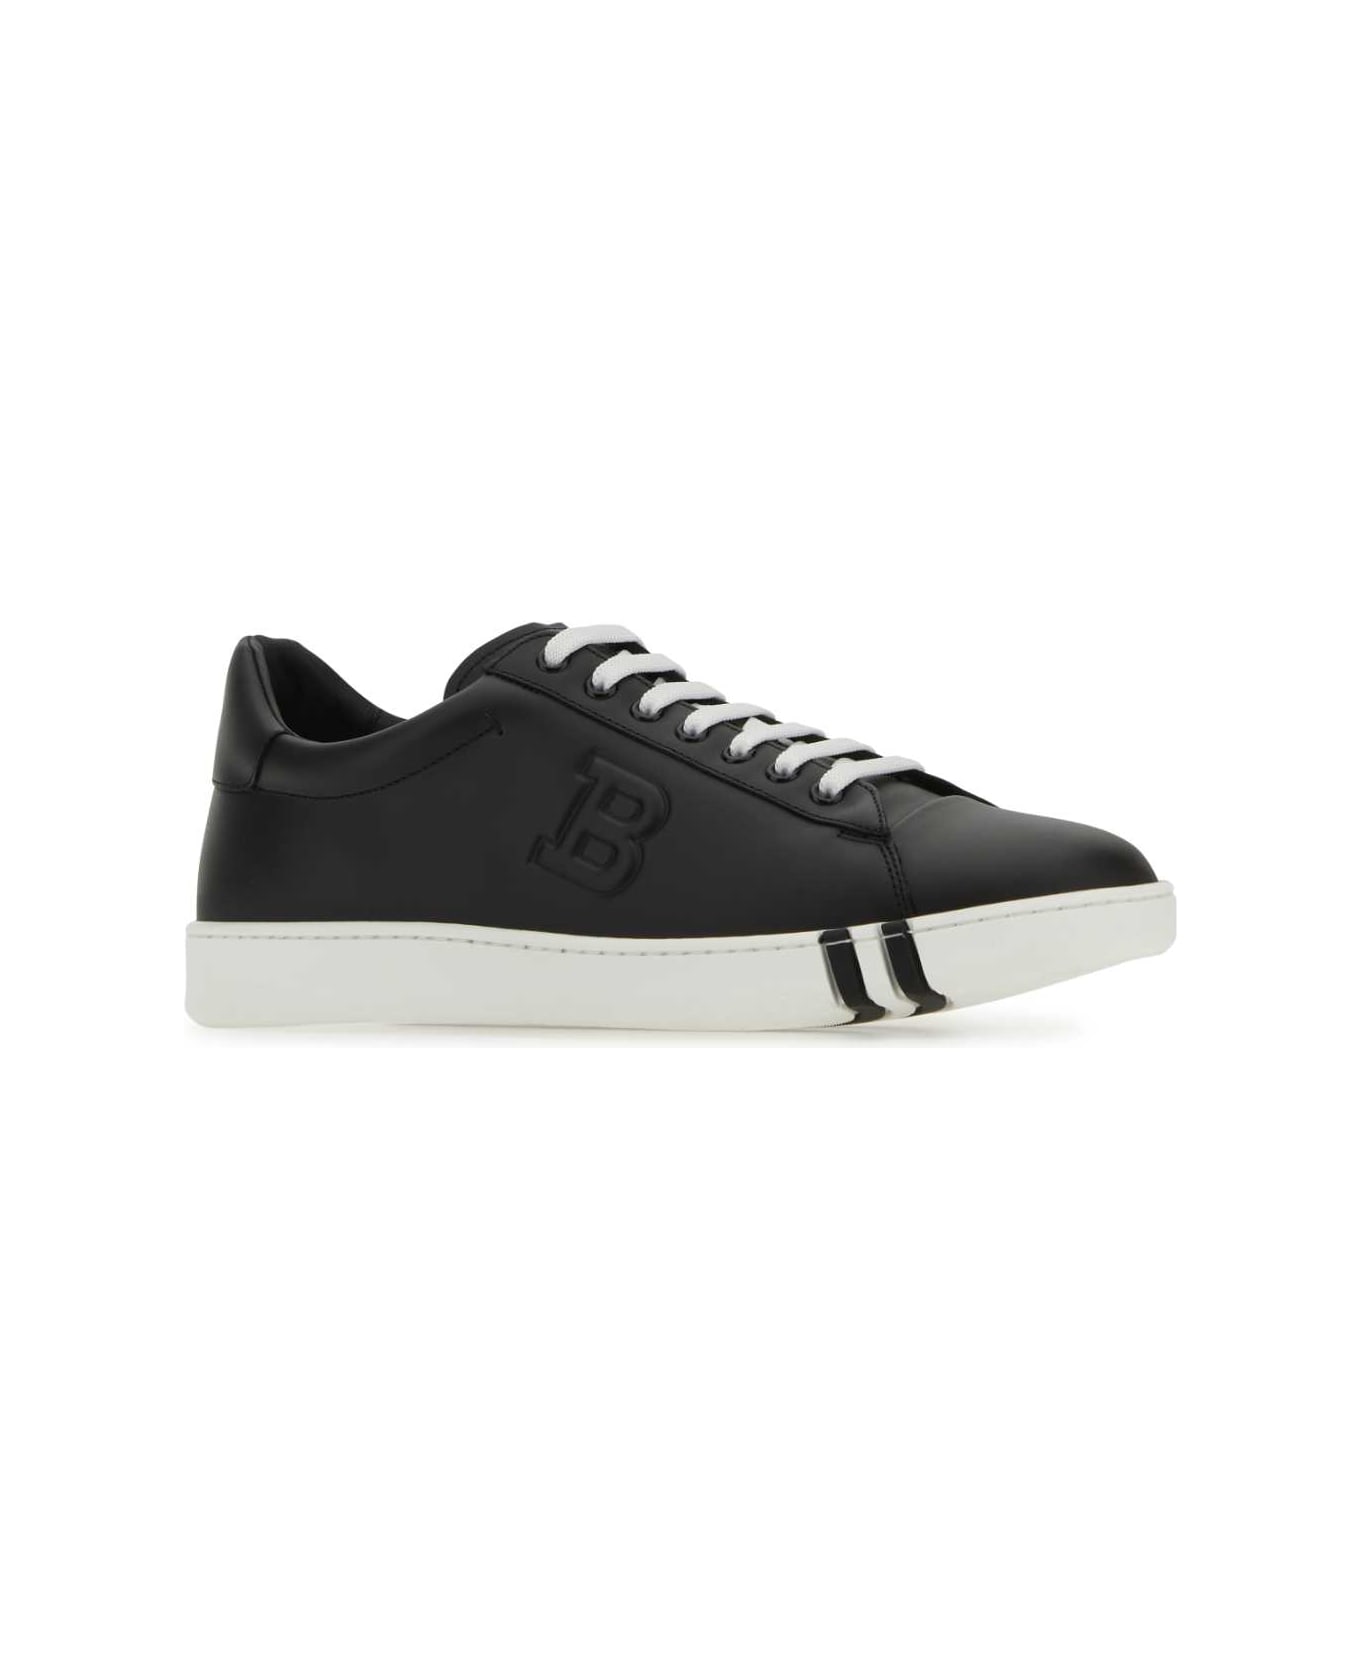 Bally Black Leather Asher Sneakers - F600